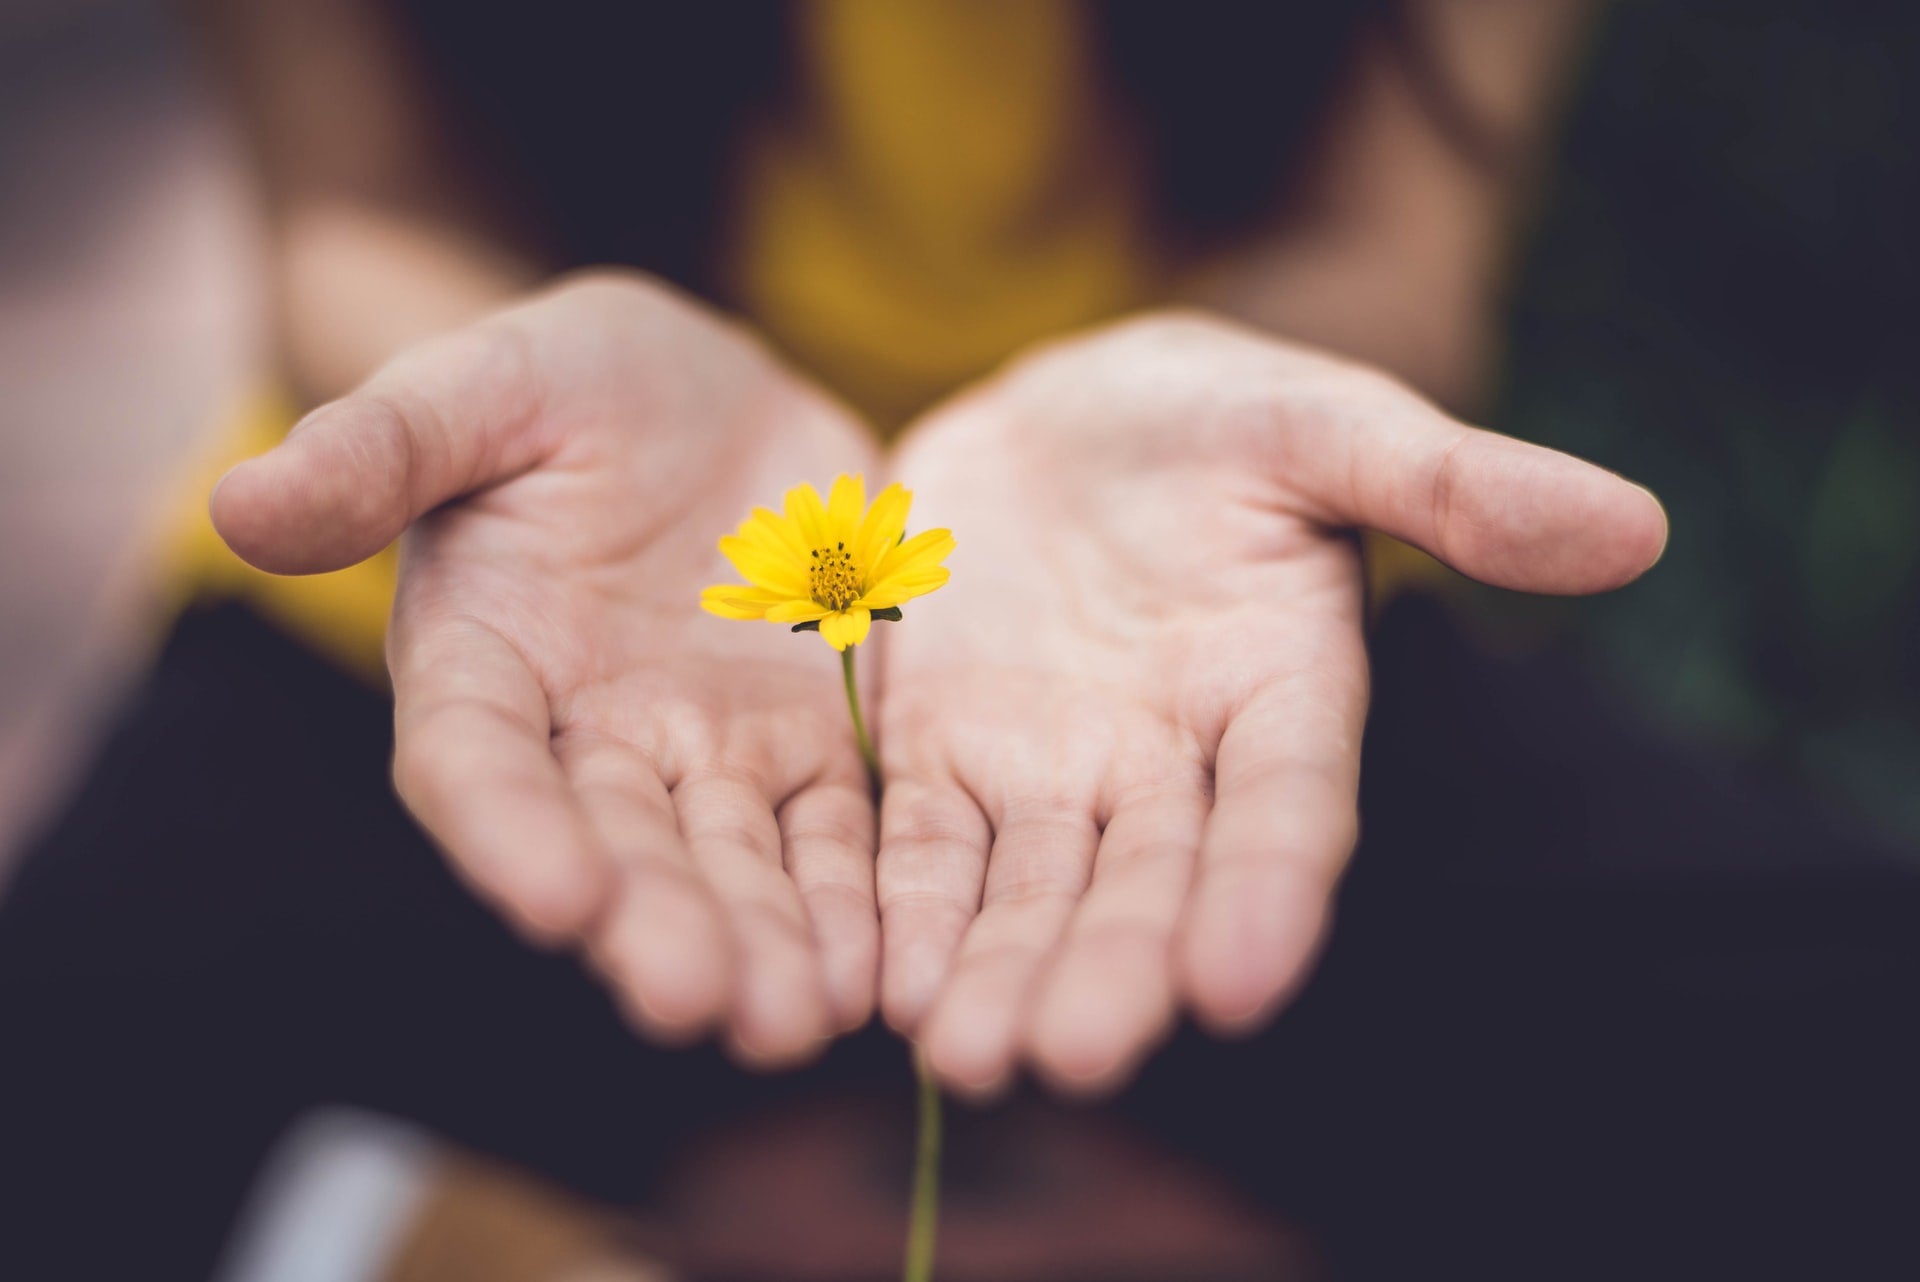 Hand holding out a yellow flower as a gift for someone with anxiety.